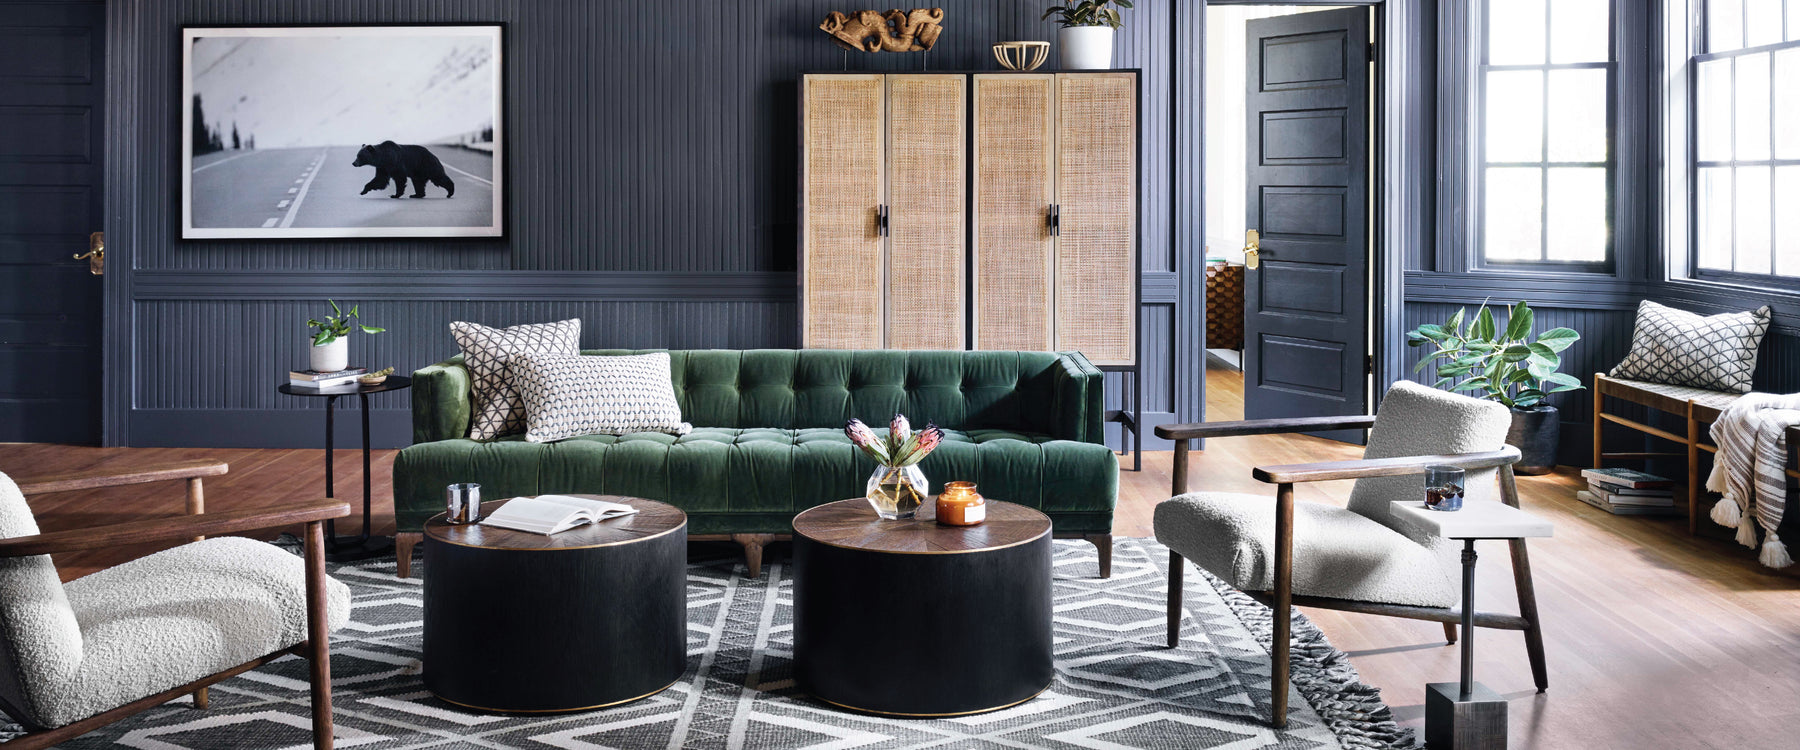 How to Style with Trend-Forward Cane Furniture